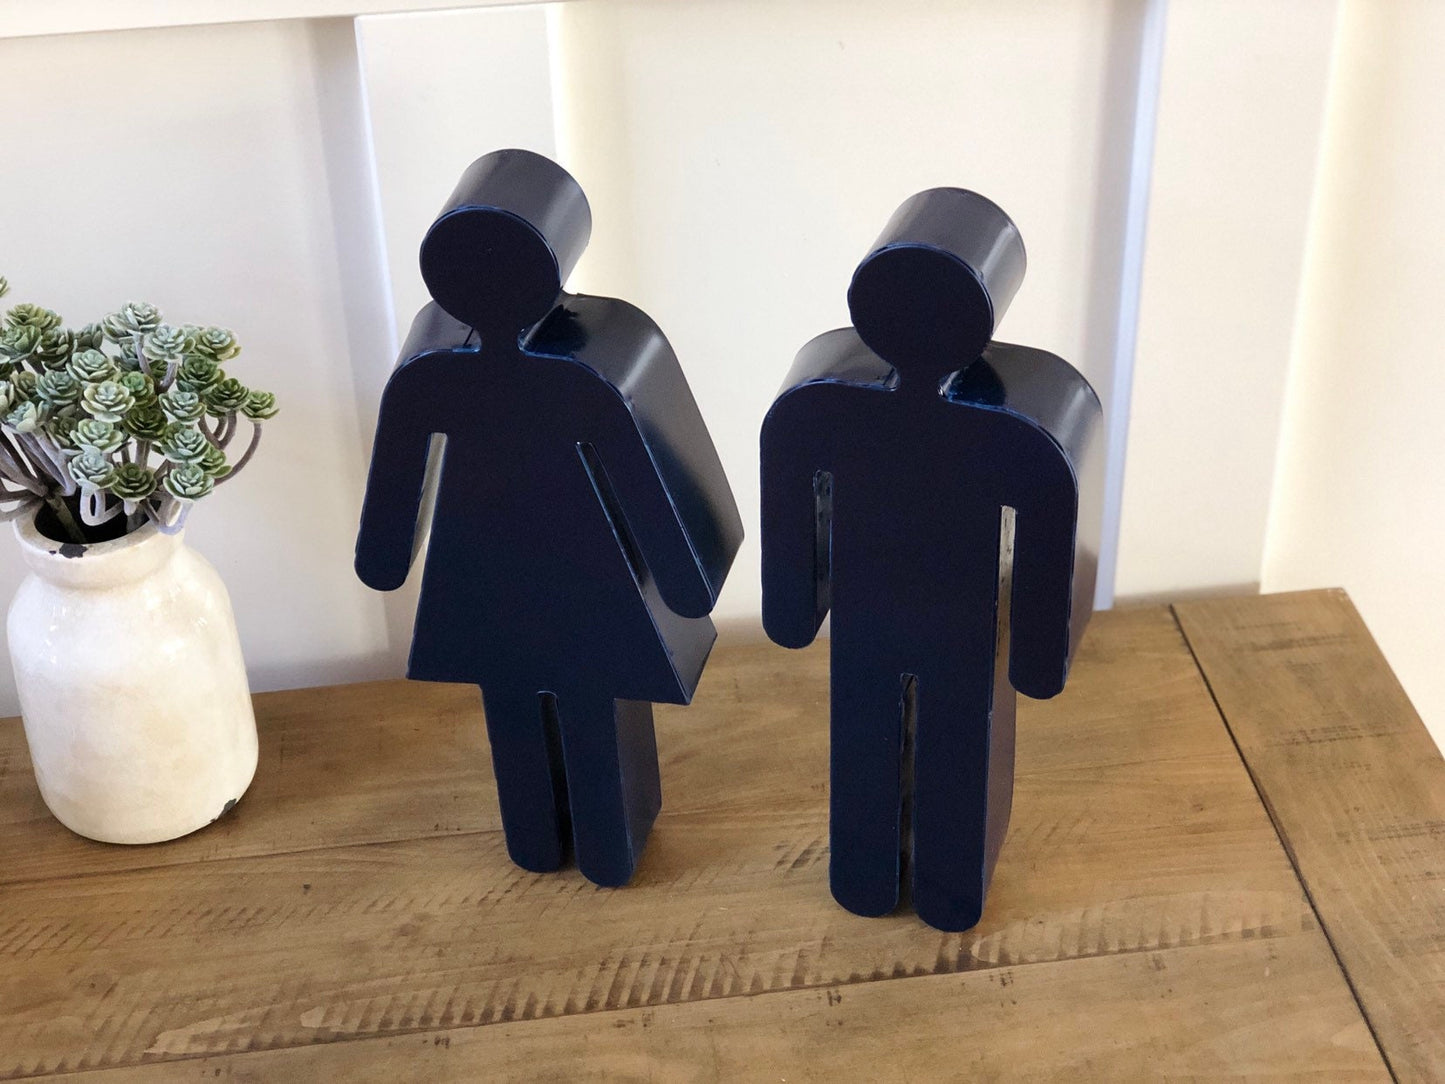 SALE/His and Hers bathroom sign/Boy and Girl bathroom sign/Metal Bathroom sign/Restaurant restroom sign/His ans hers sign/Potty sign